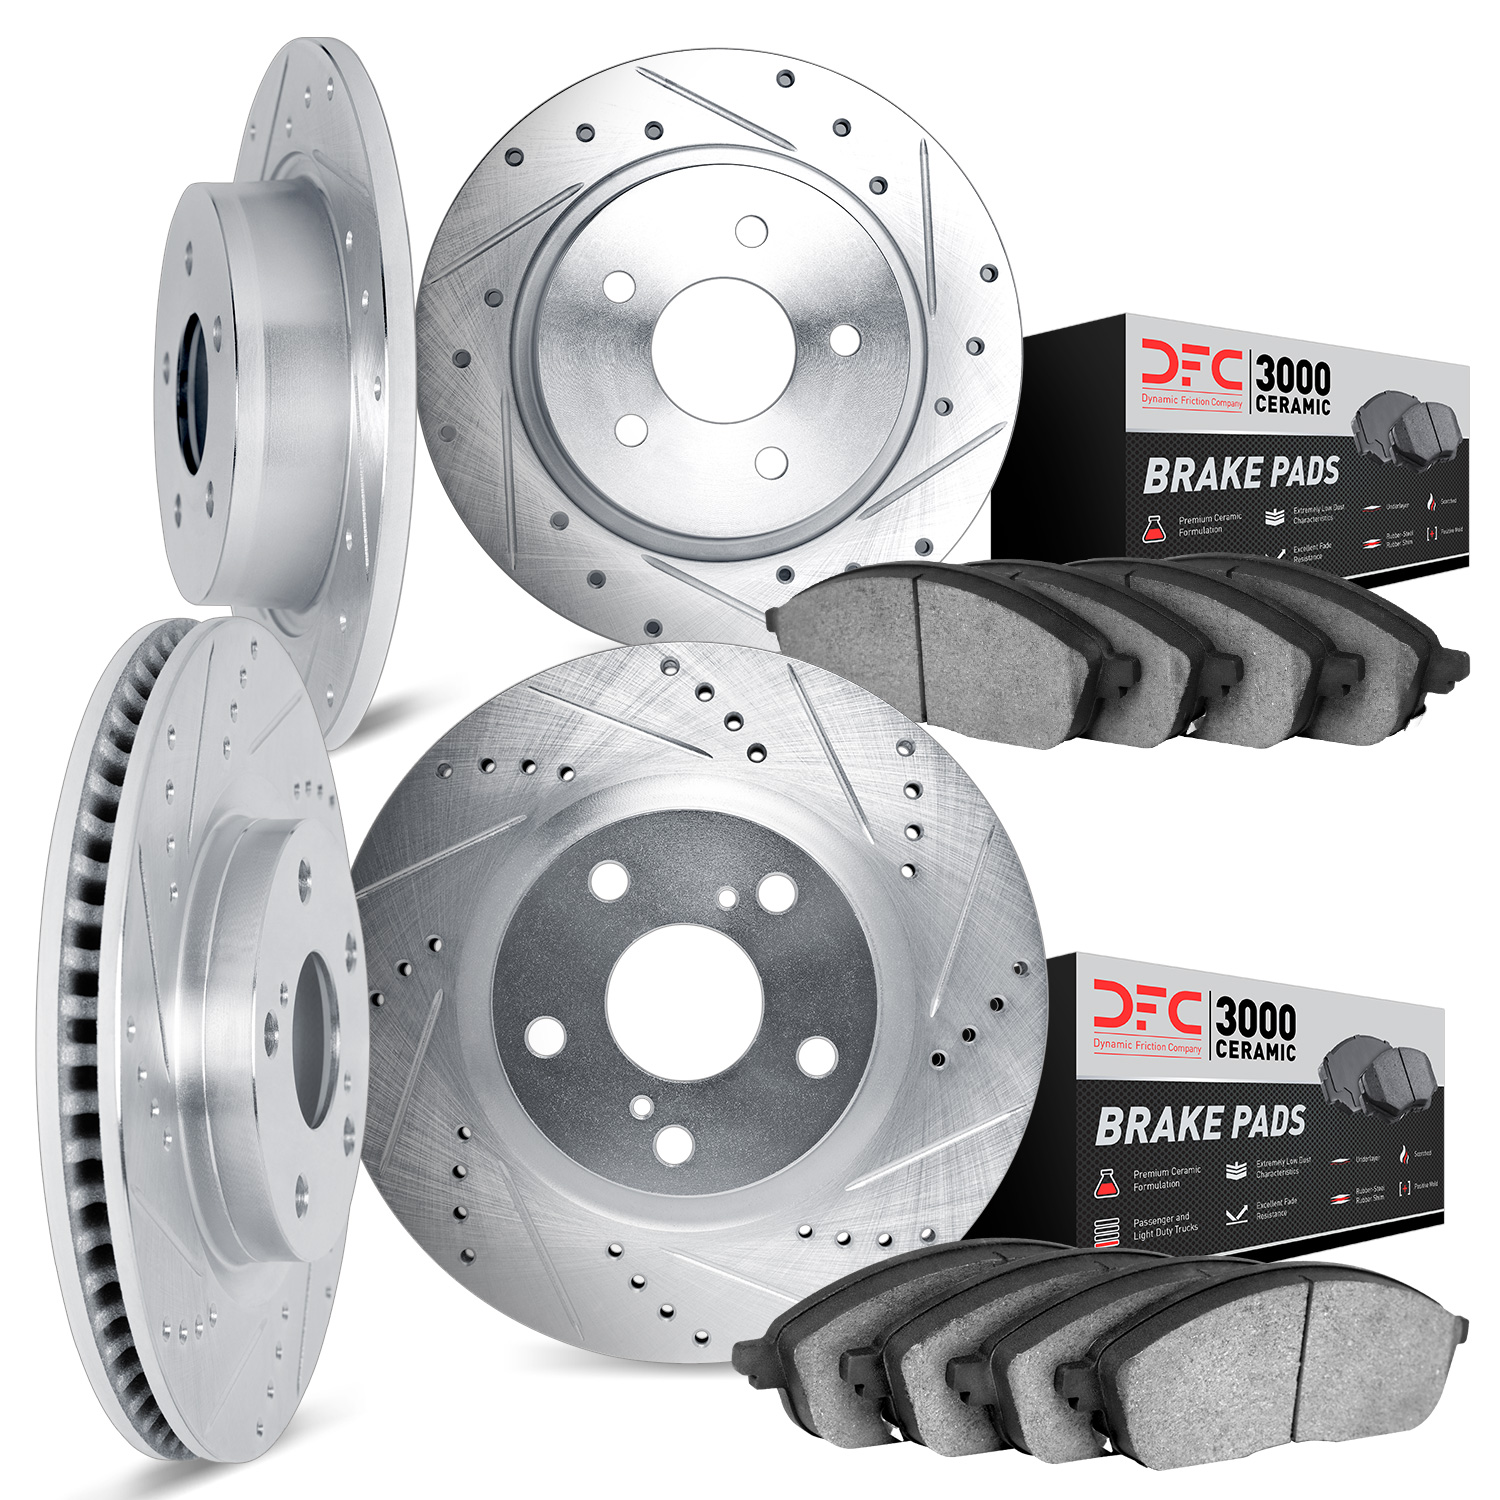 7304-80039 Drilled/Slotted Brake Rotor with 3000-Series Ceramic Brake Pads Kit [Silver], 2016-2018 Ford/Lincoln/Mercury/Mazda, P